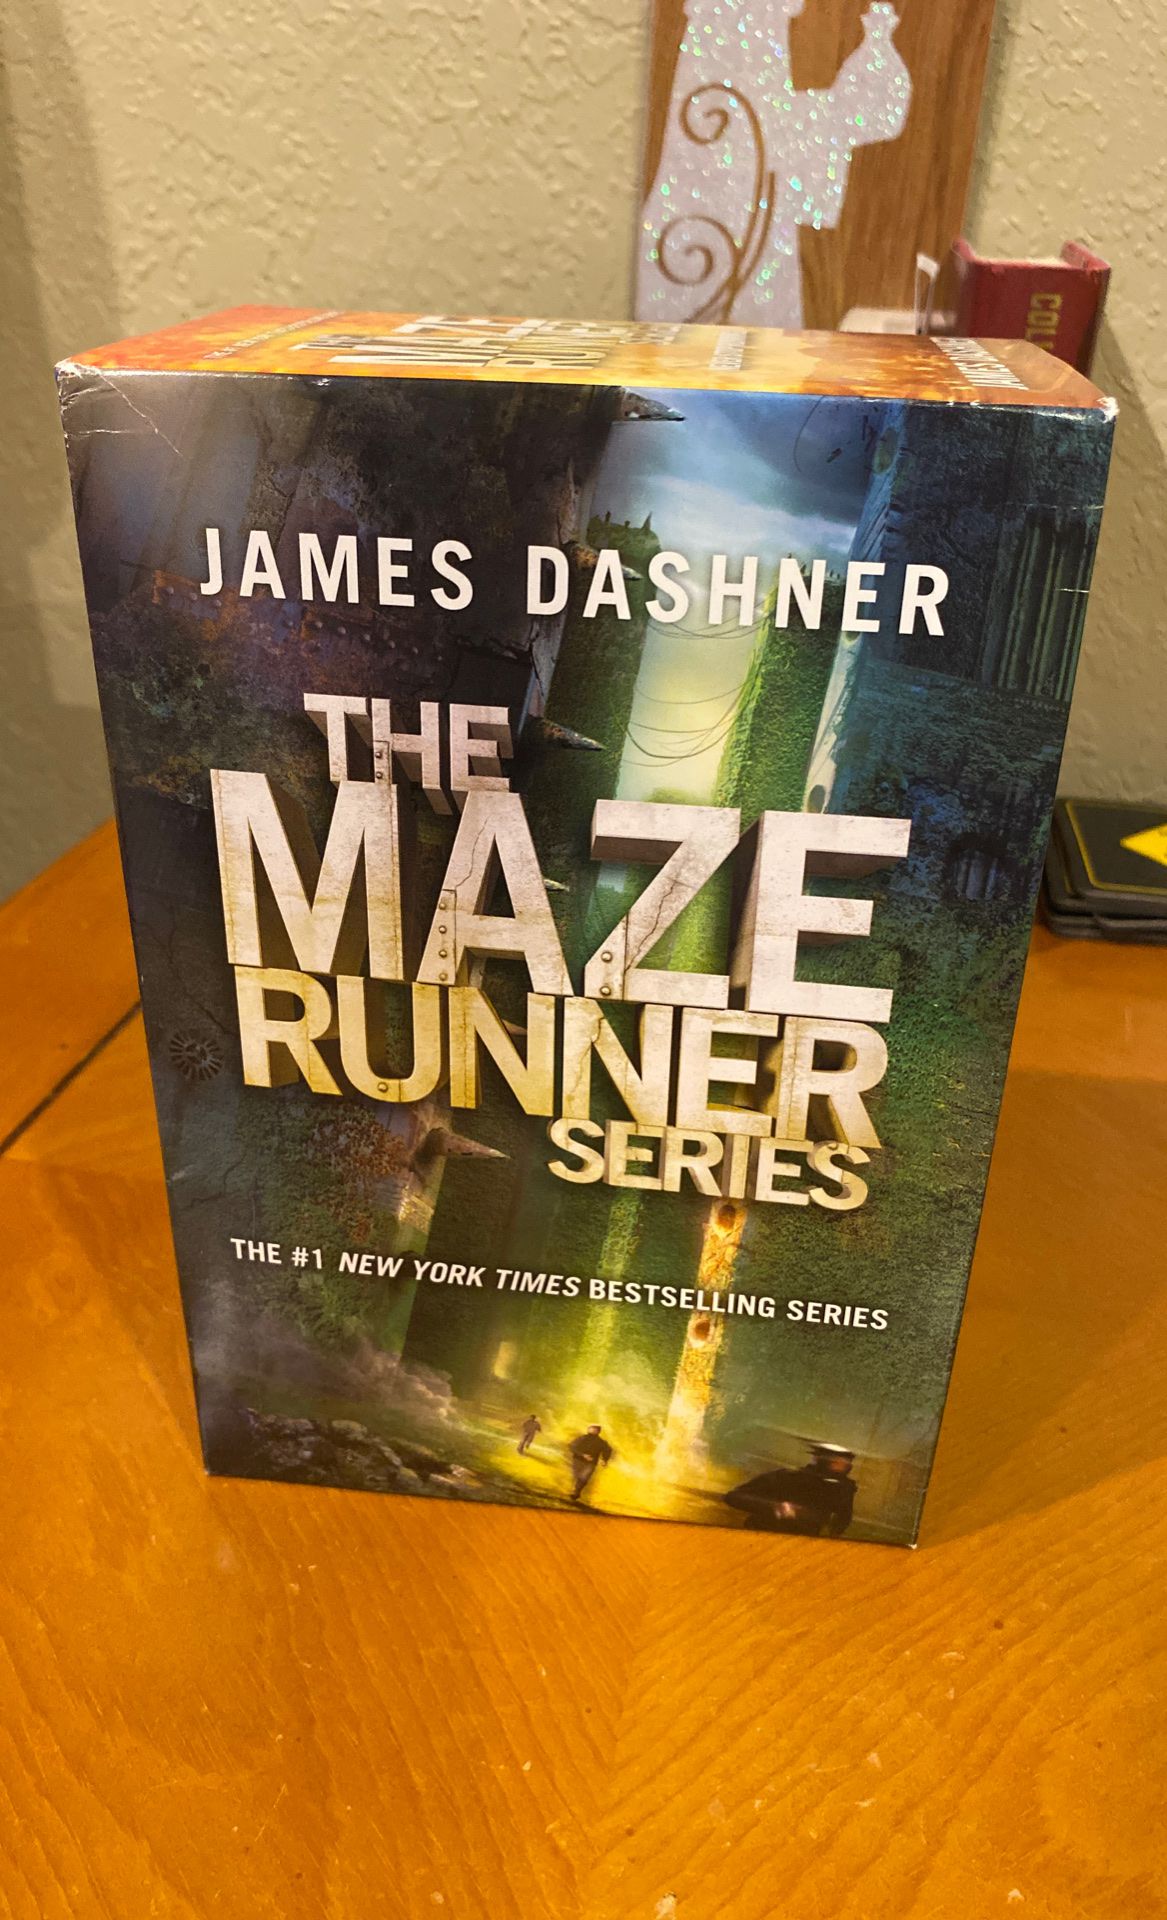 Maze Runner Book Series Full Set (The Maze Runner, The Scorch Trials, The Death Cure, The Kill Order)